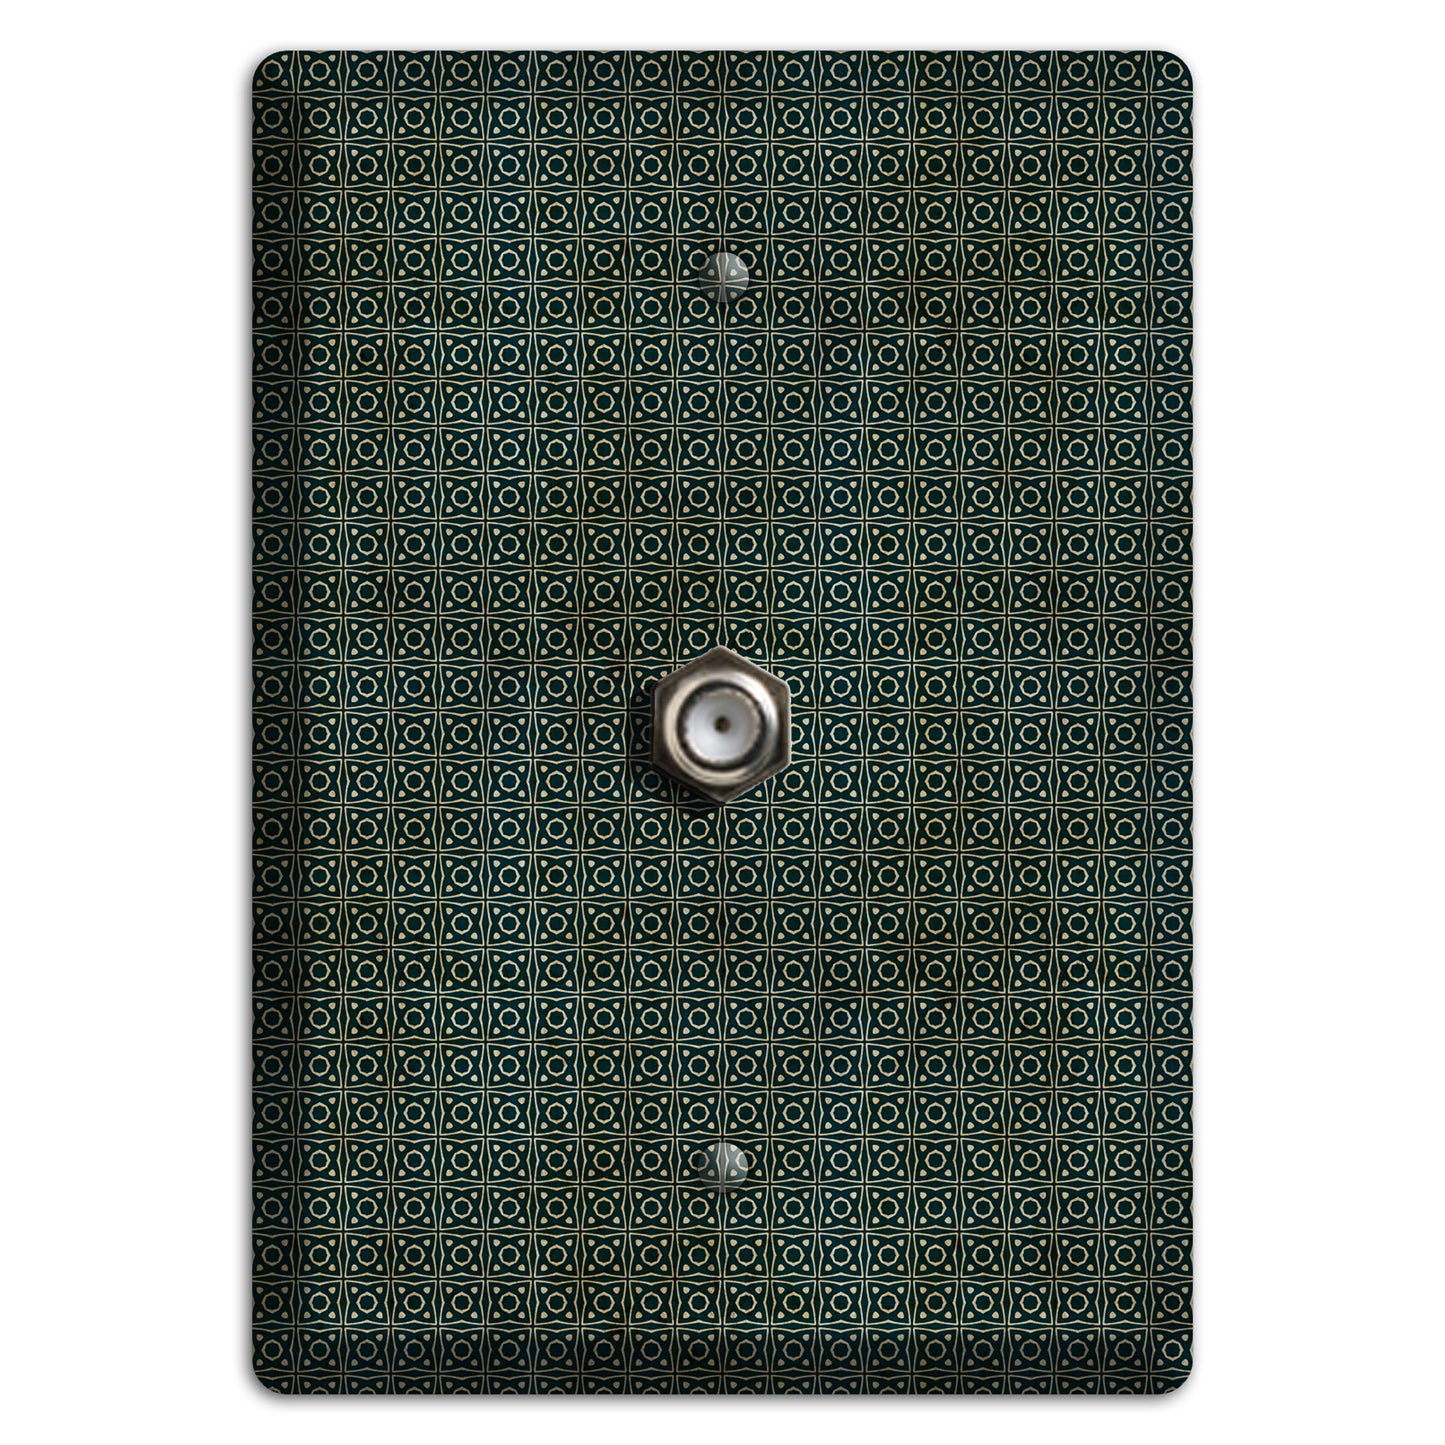 Dark Green Grunge Tiny Tiled Tapestry 4 Cable Wallplate